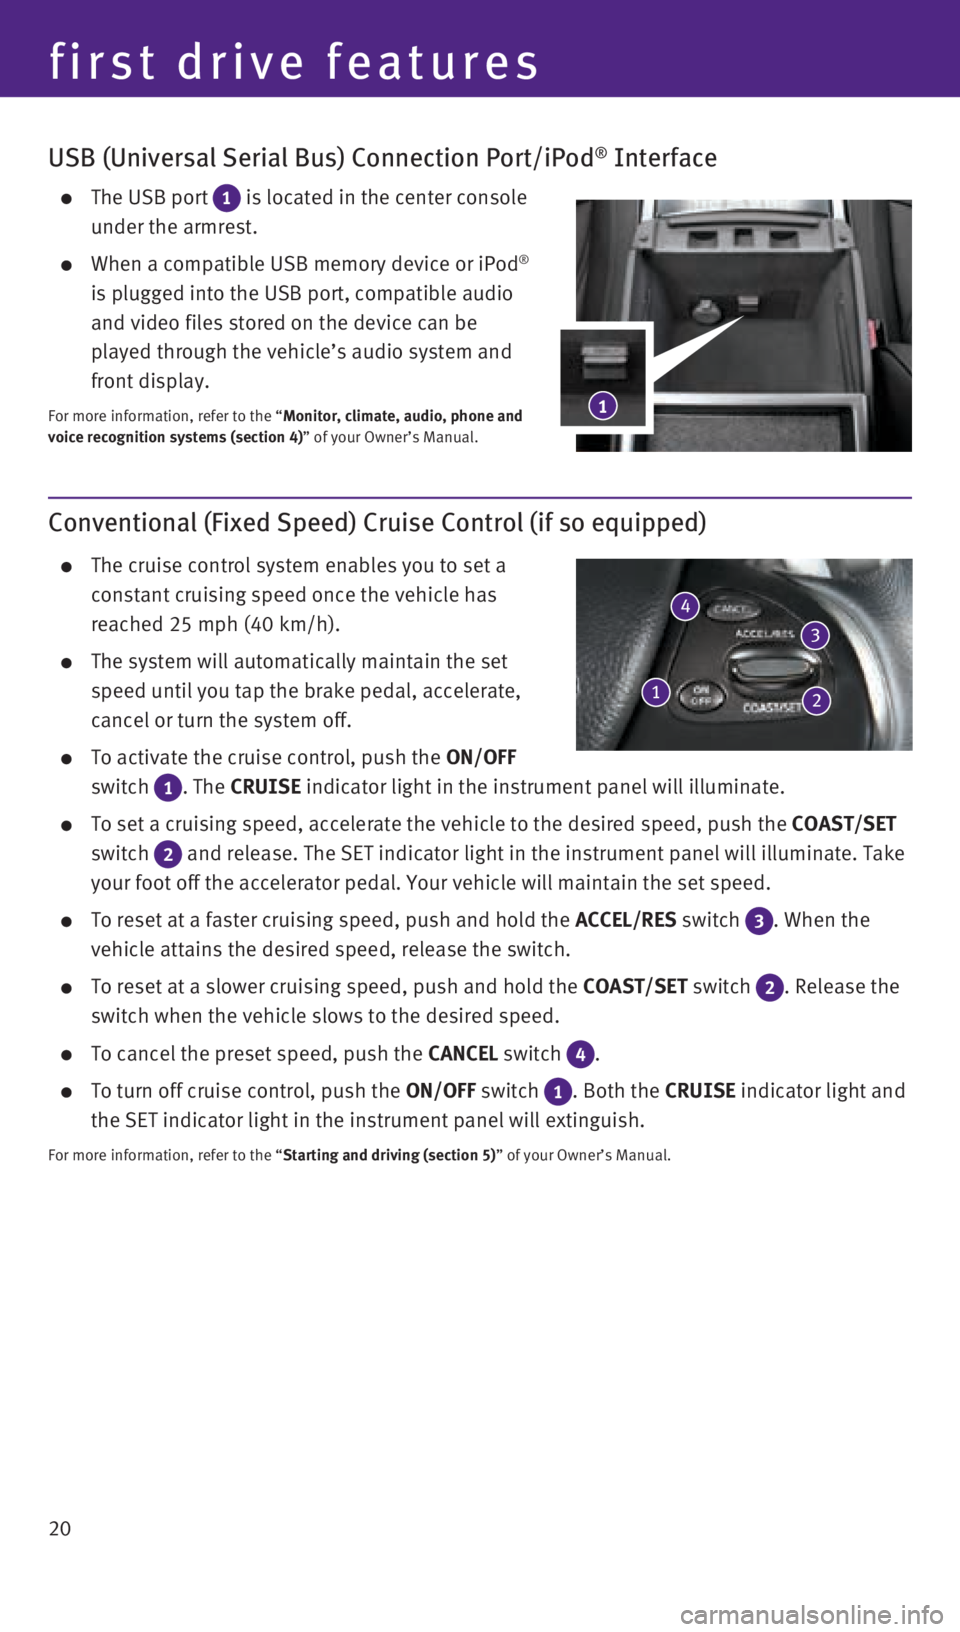 INFINITI Q70 HYBRID 2016  Quick Reference Guide 20
USB (Universal Serial Bus) Connection Port/iPod® Interface
    The USB port 1  is located in the center console 
under the armrest.
 
    When a compatible USB memory device or iPod®  
is plugged